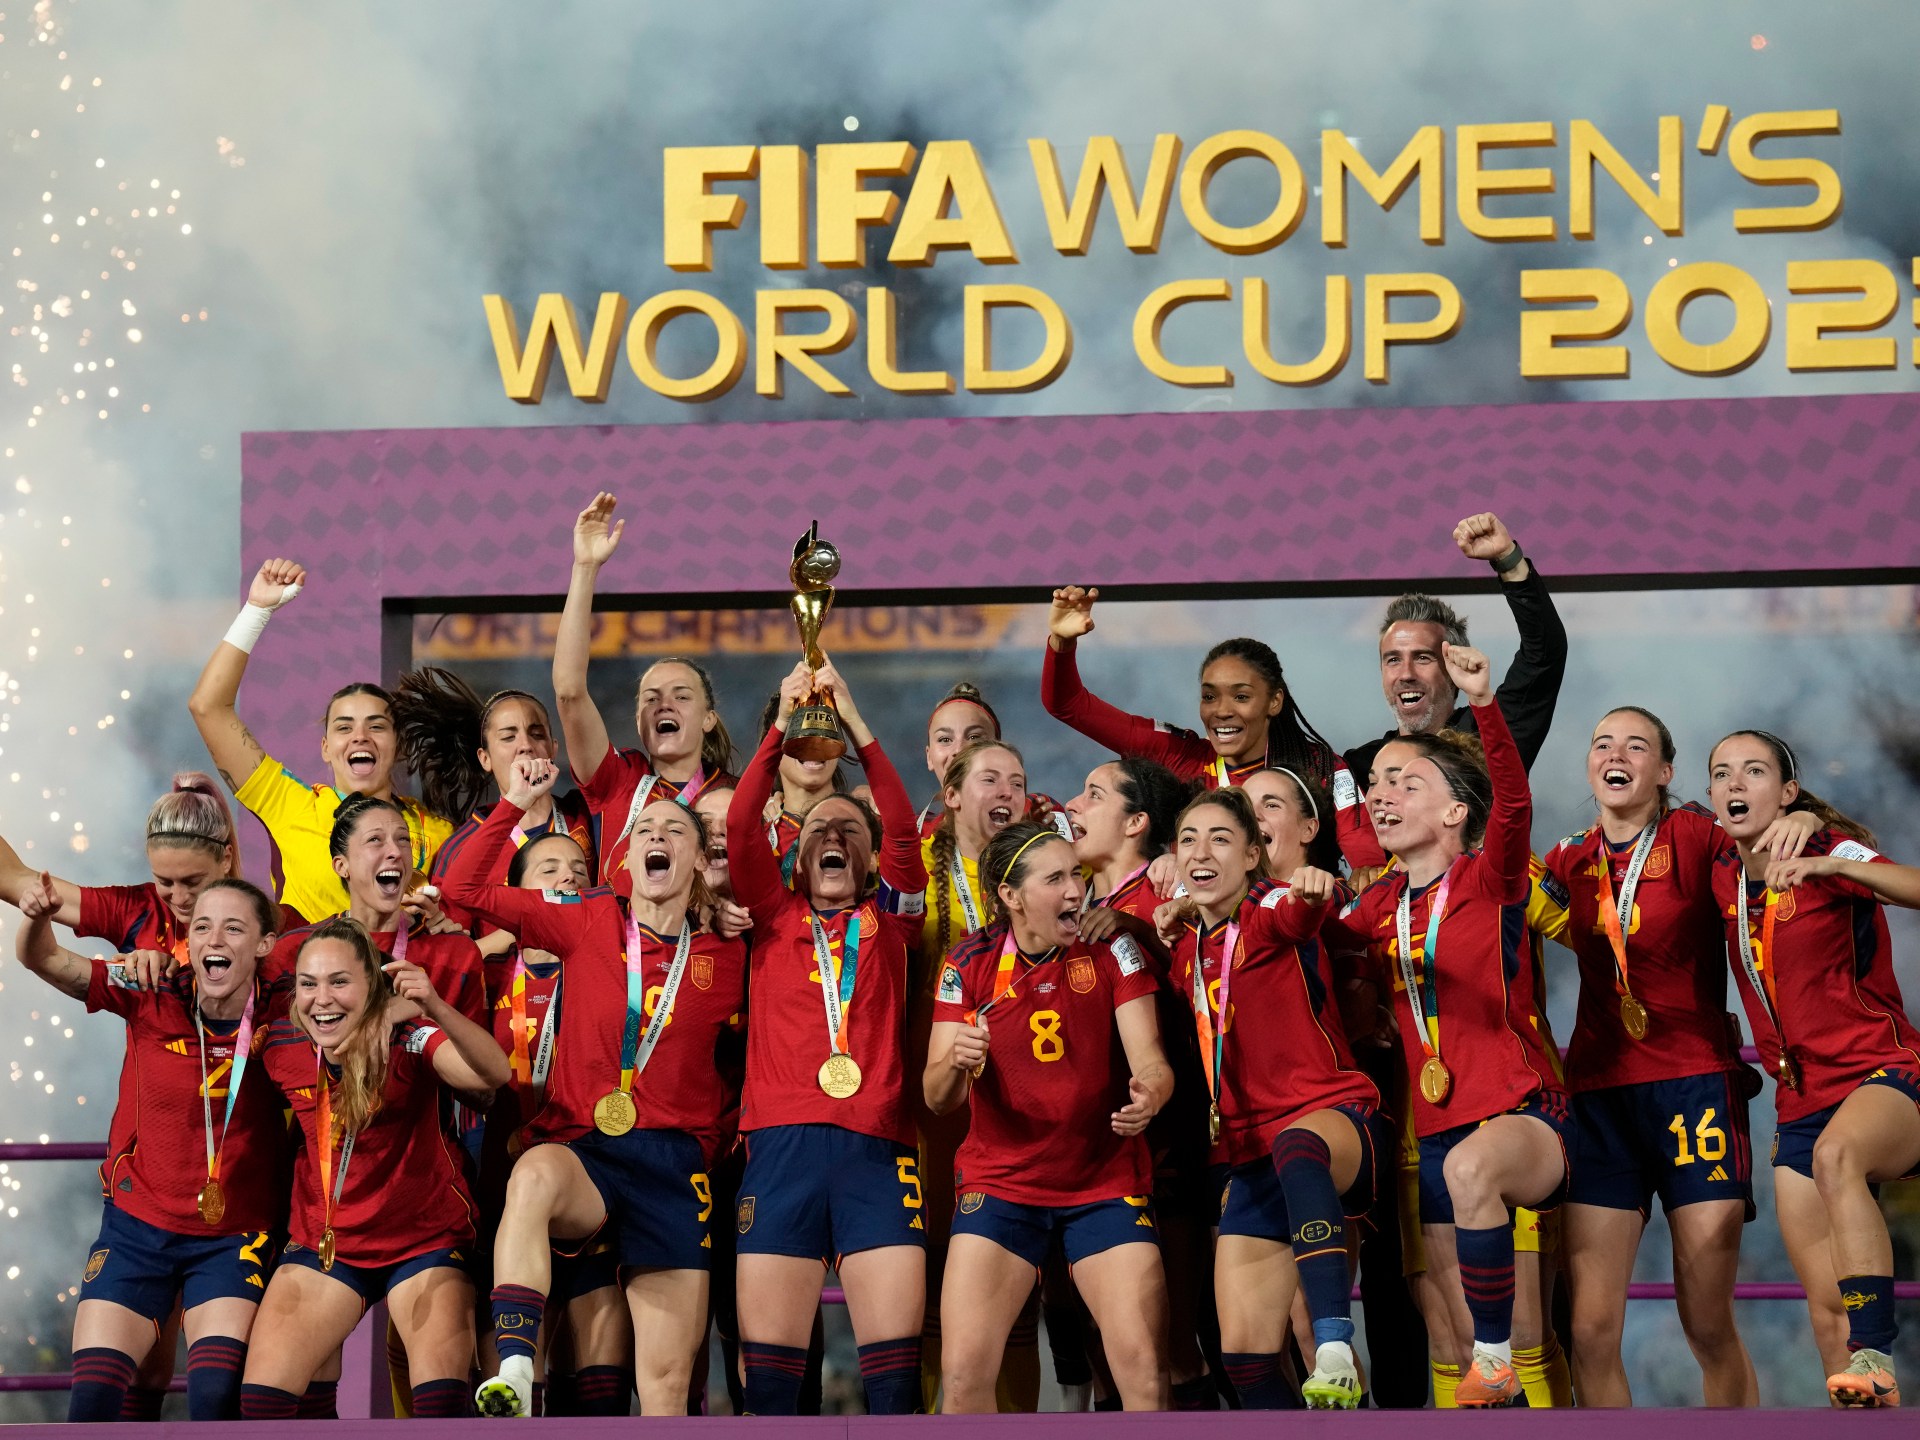 United States and Mexico launch joint bid for 2027 Women’s World Cup